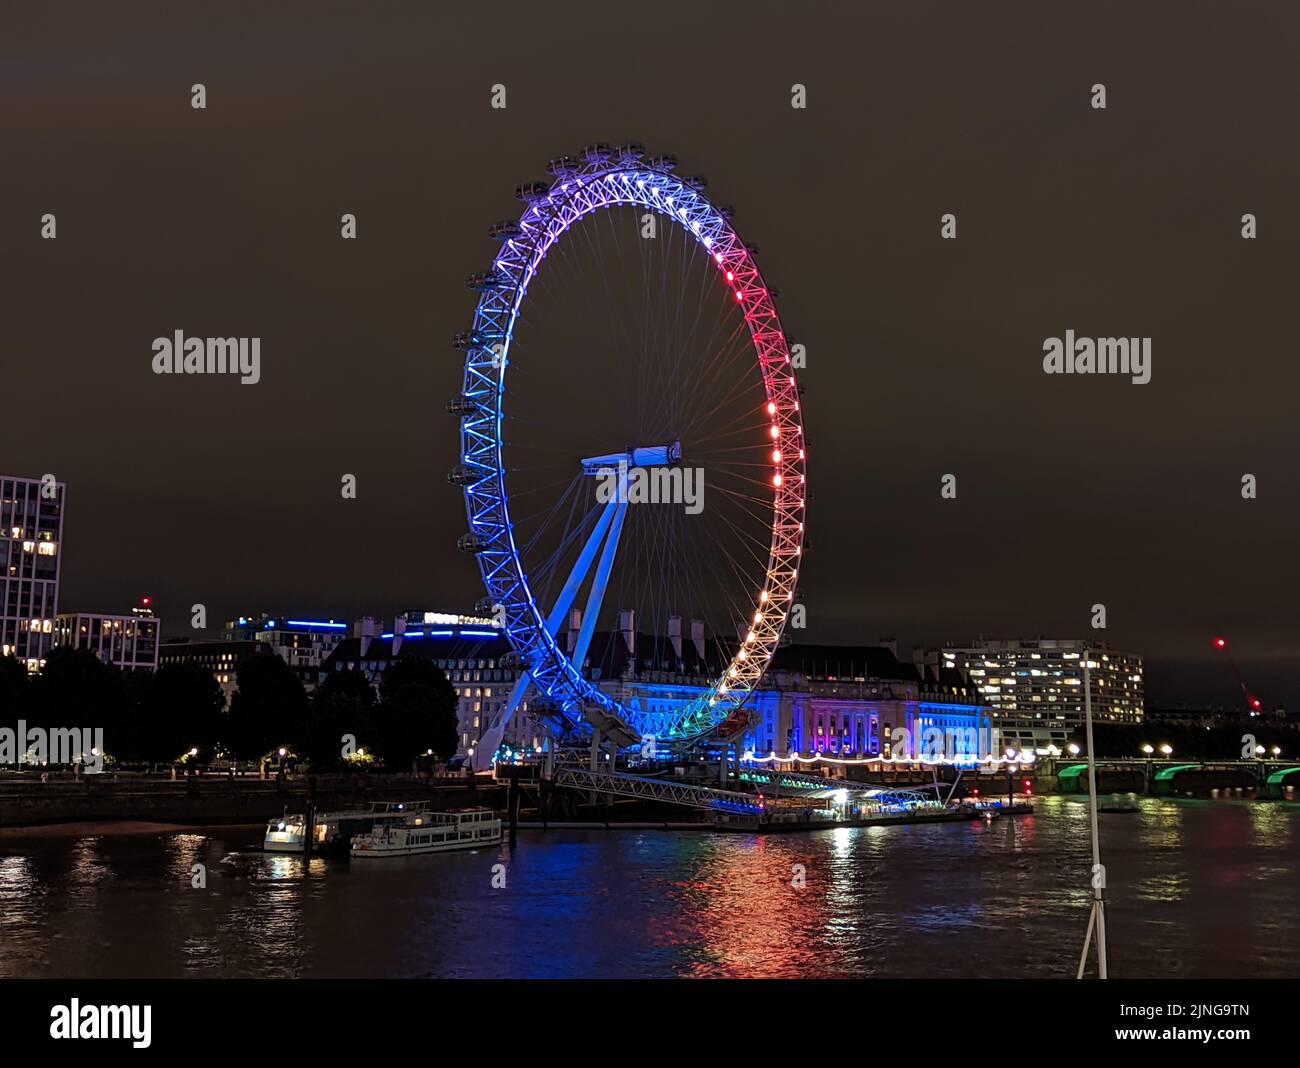 A London Eye ferris wheel in rainbow colors in support of London Pride, July 2nd 2022 Stock Photo